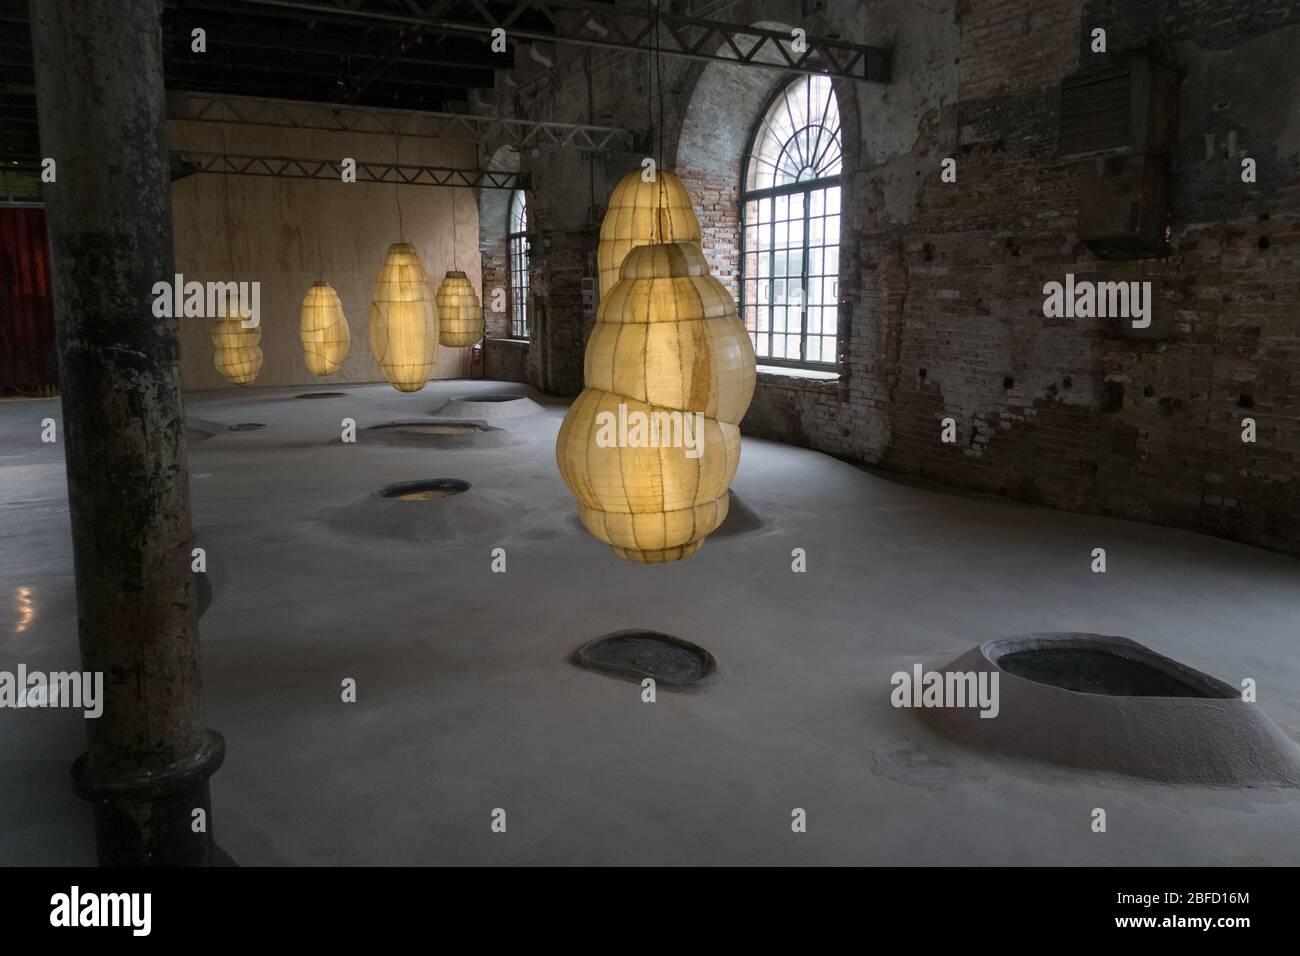 The artwork 'Biologizing the Machine', by artist Anicka Yi exposed at the Venice Biennale 2019 Stock Photo